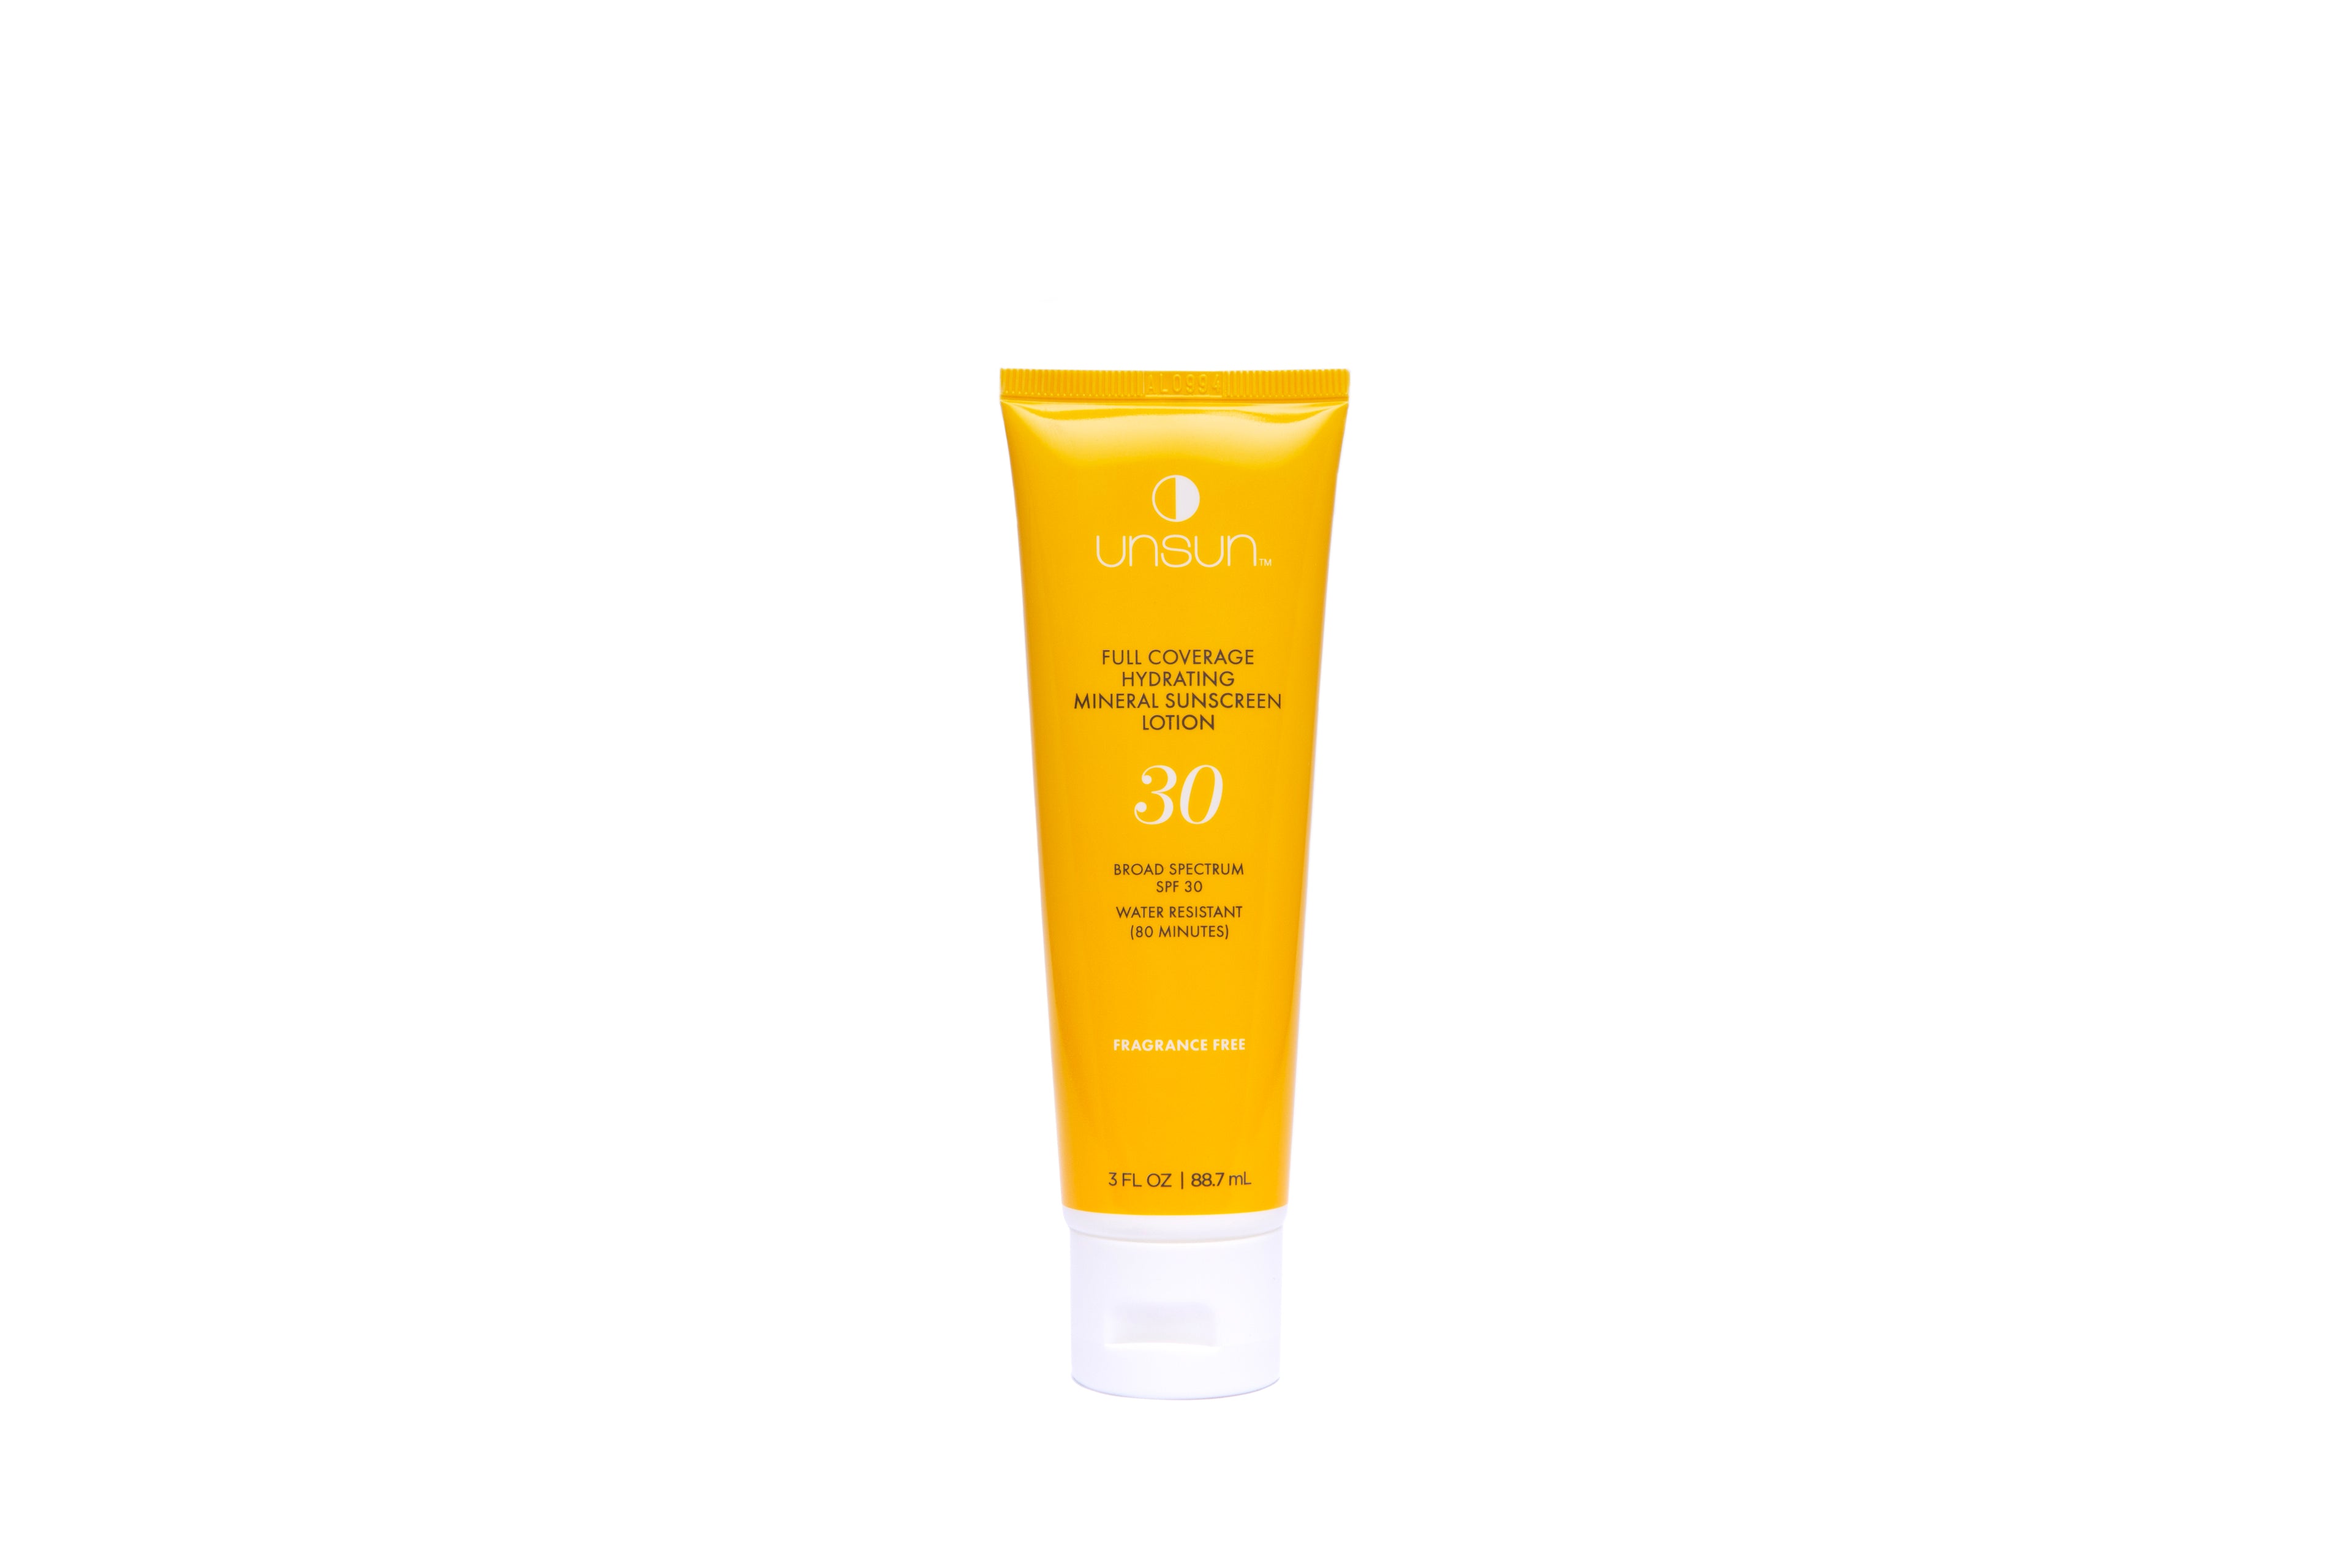 Full Coverage Hydrating Mineral Sunscreen Lotion SPF 30